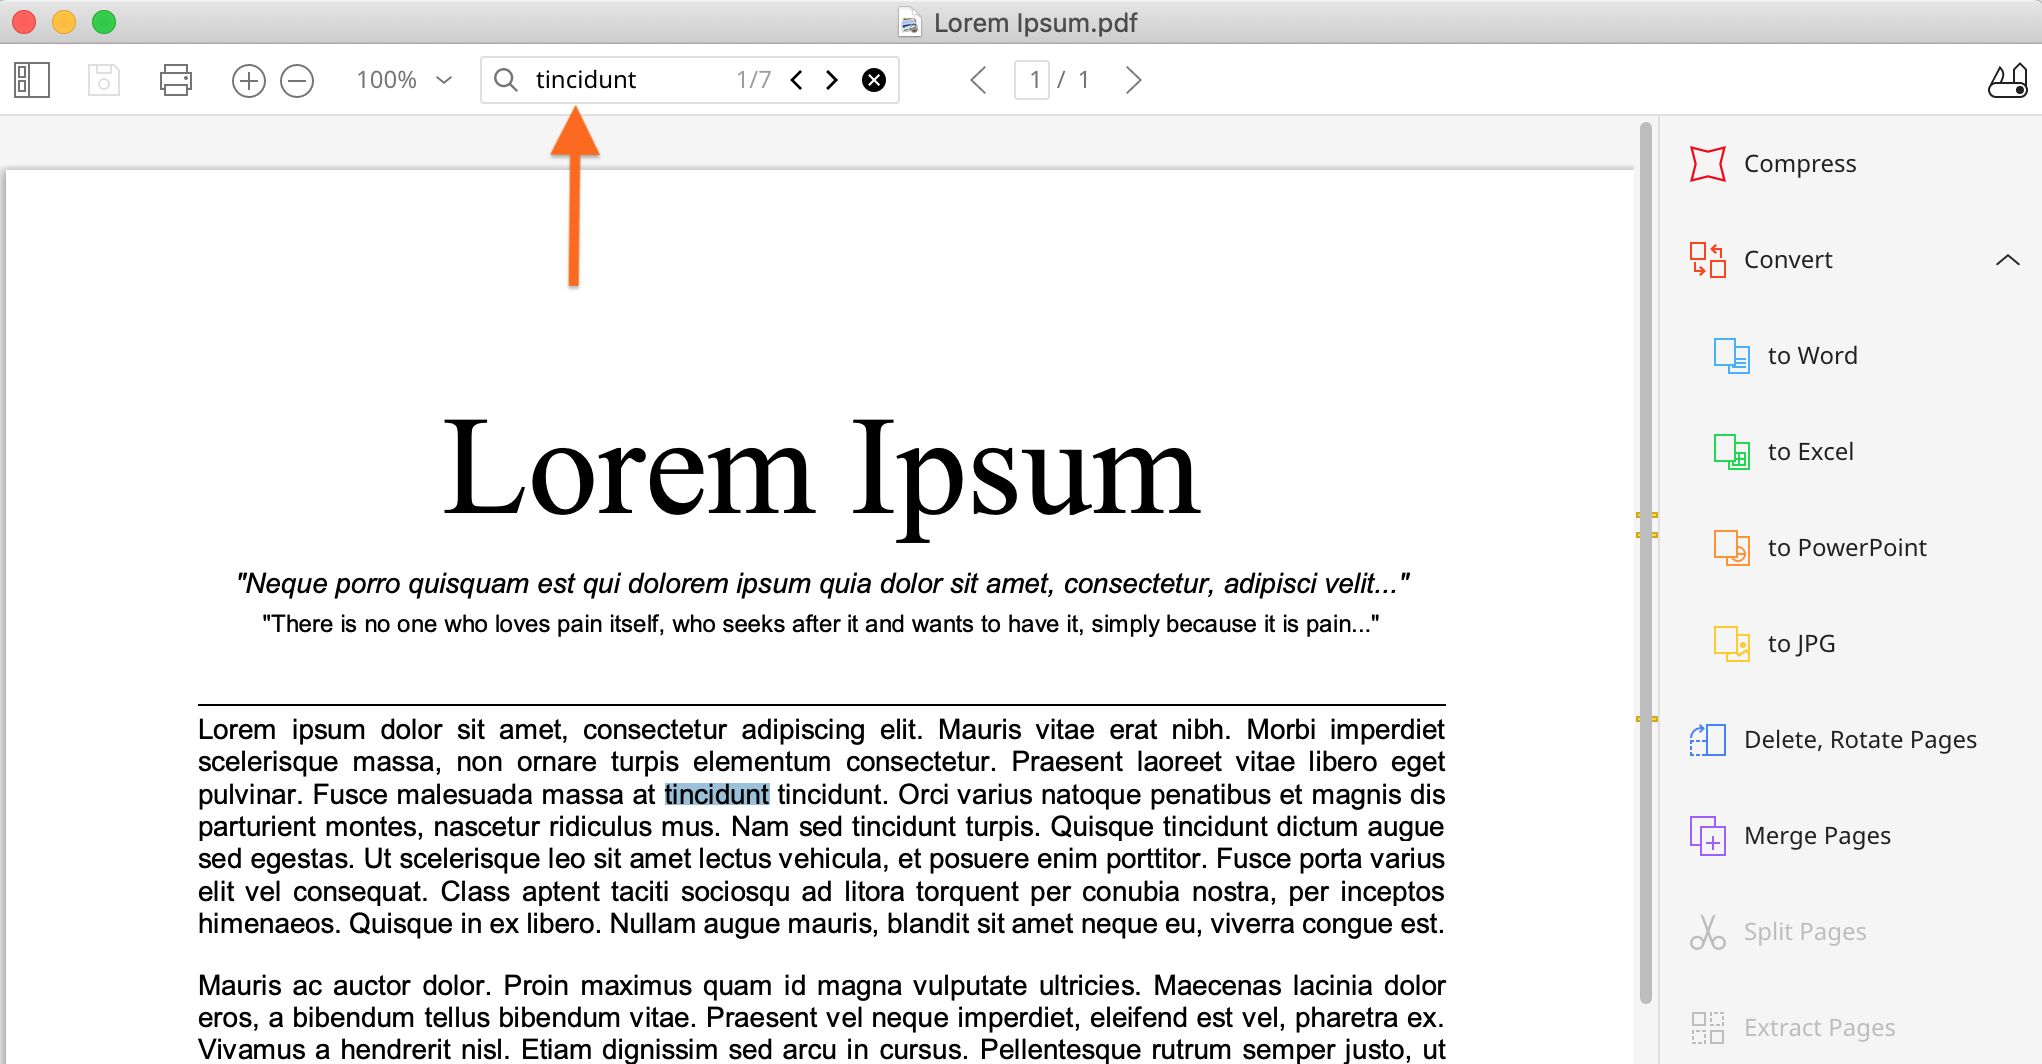 search for a word be in multiple scanned documents on a mac?